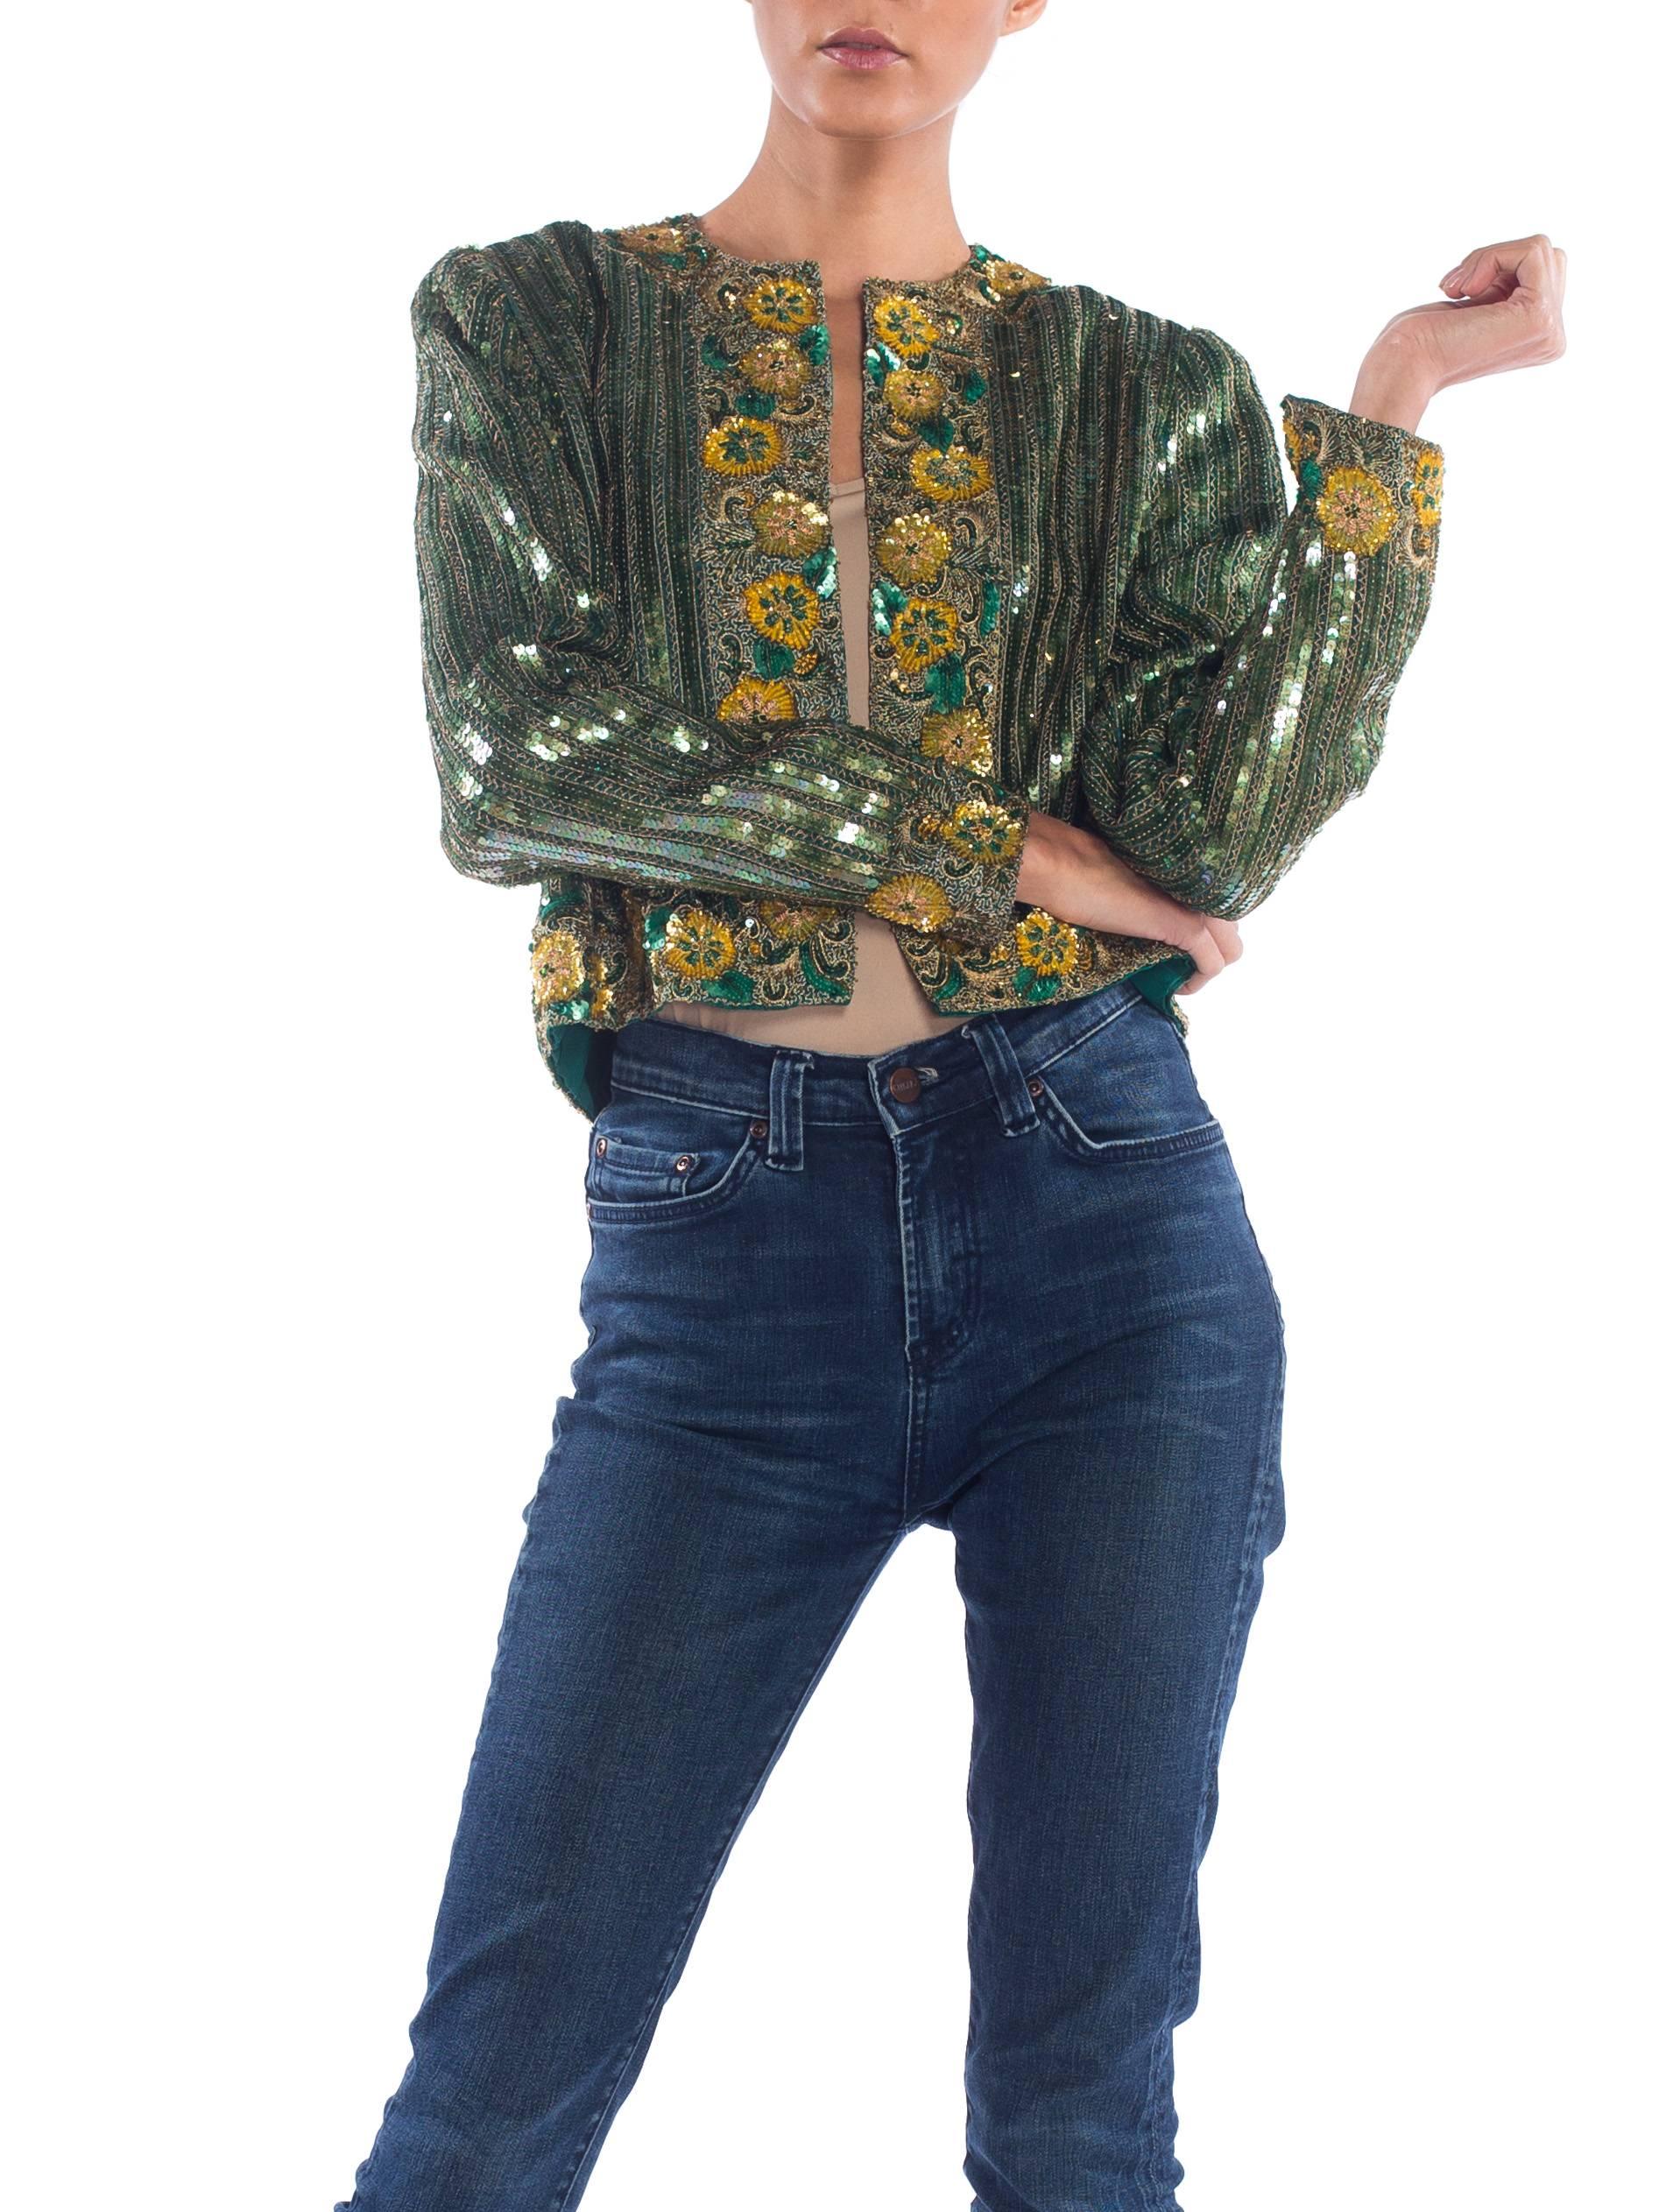 1980S RICHILENE Emerald Green Silk Jacket Beaded With Gold Flowers & Embroidery 1